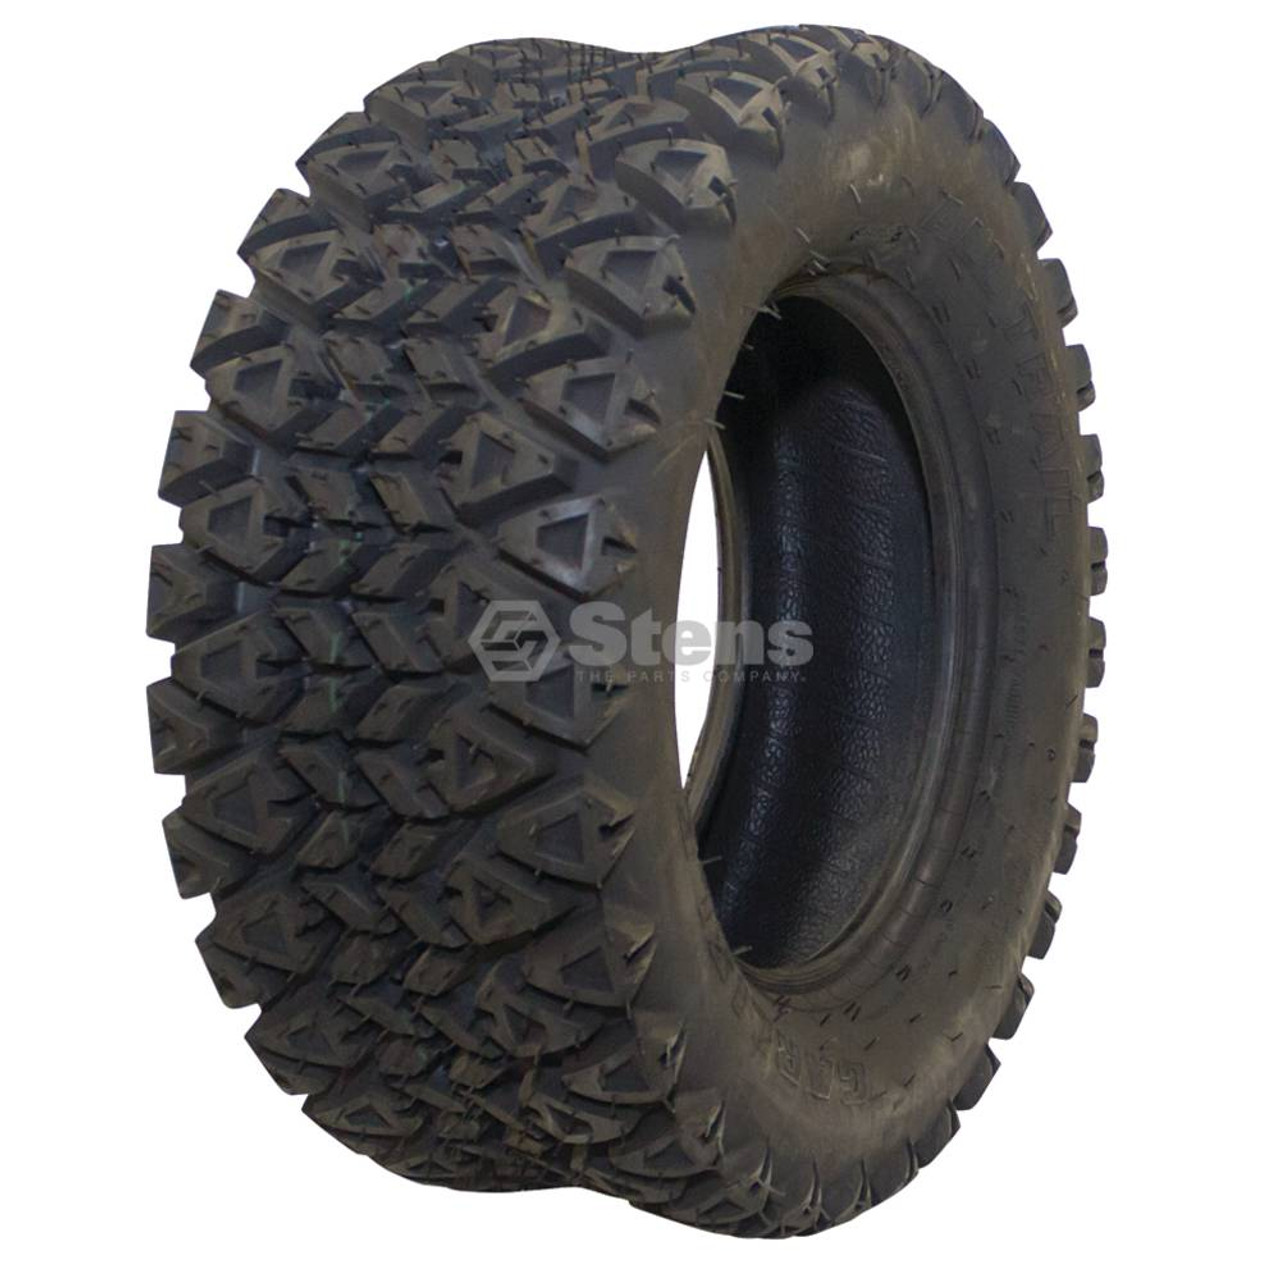 Tire / 23x8.00-12 All Trail 4 Ply